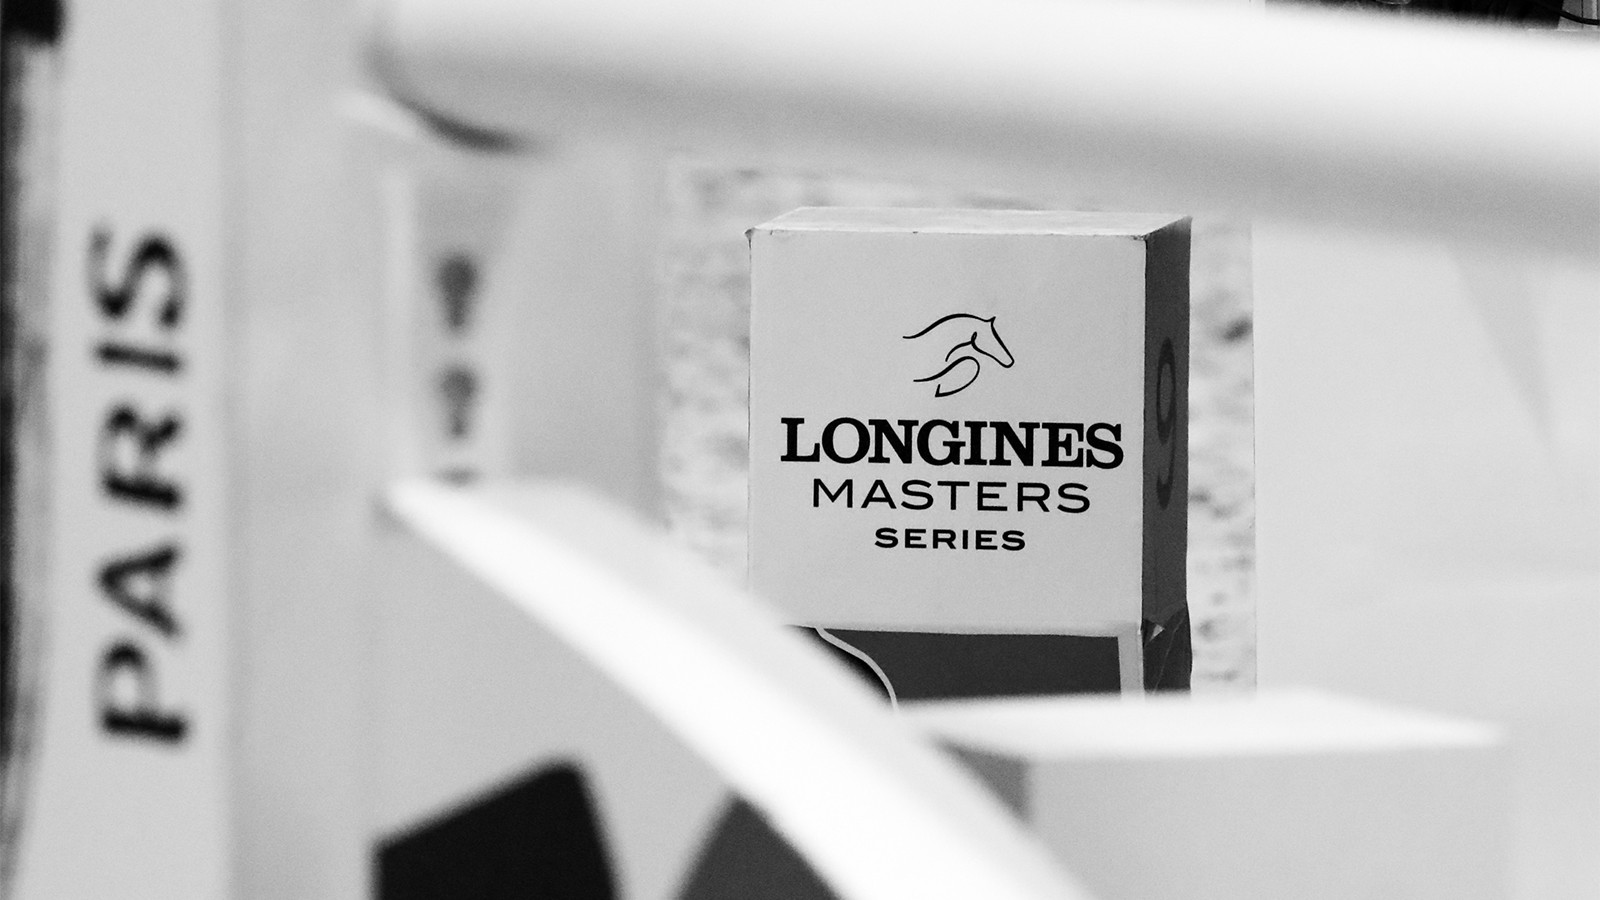 www.lacavalieremasquee.com | The partnership between EEM and Longines comes to an end